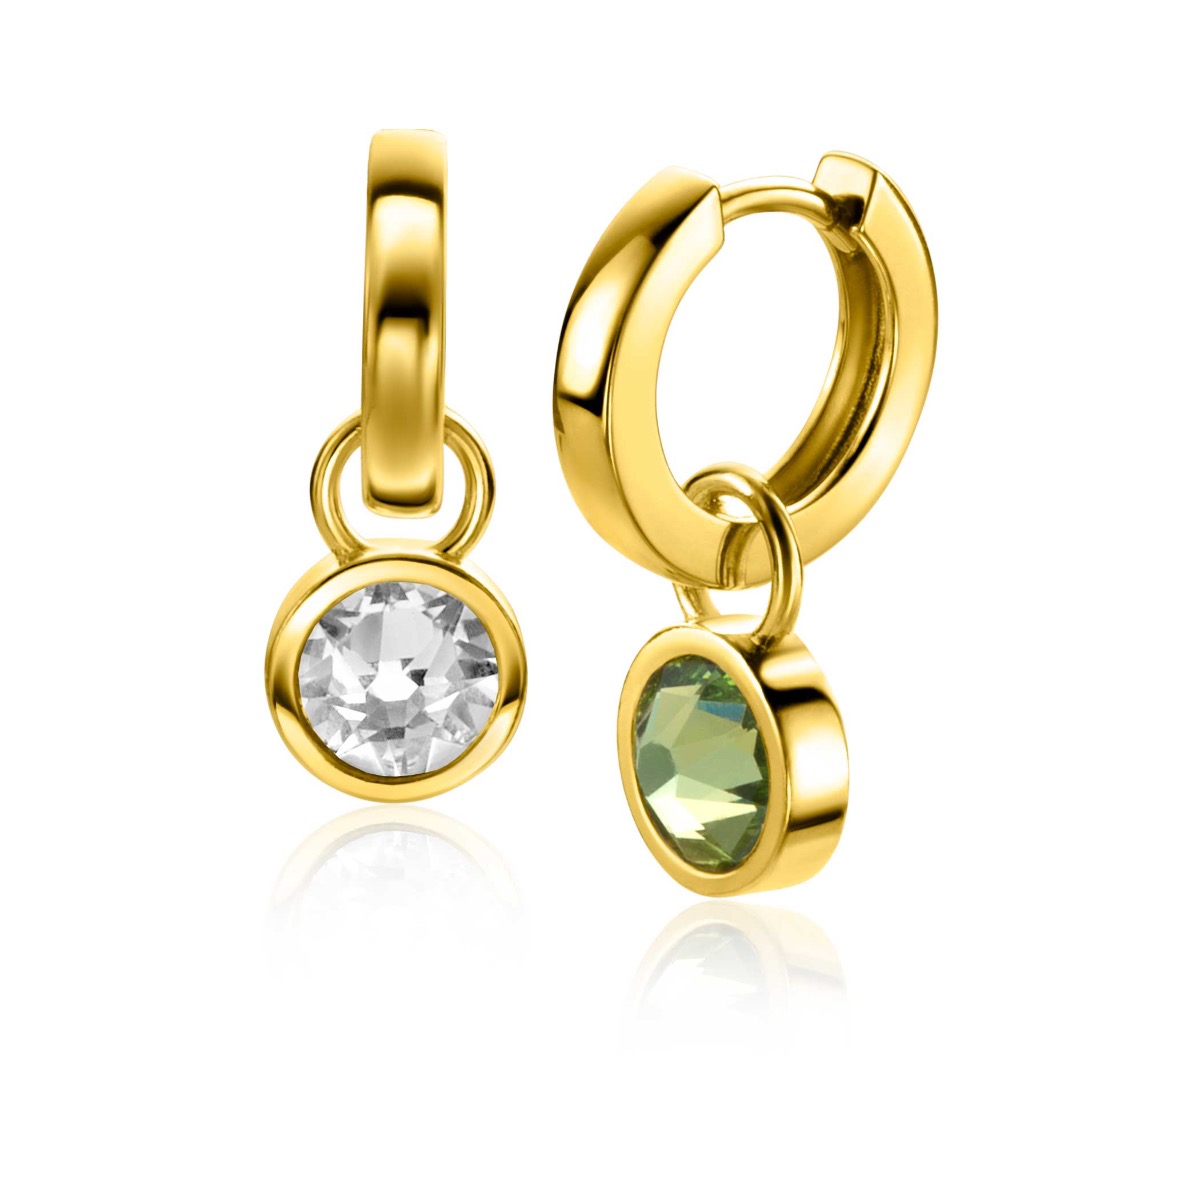 ZINZI Gold Plated Sterling Silver Earrings Pendants Green and White ZICH1006G (excl. hoop earrings)